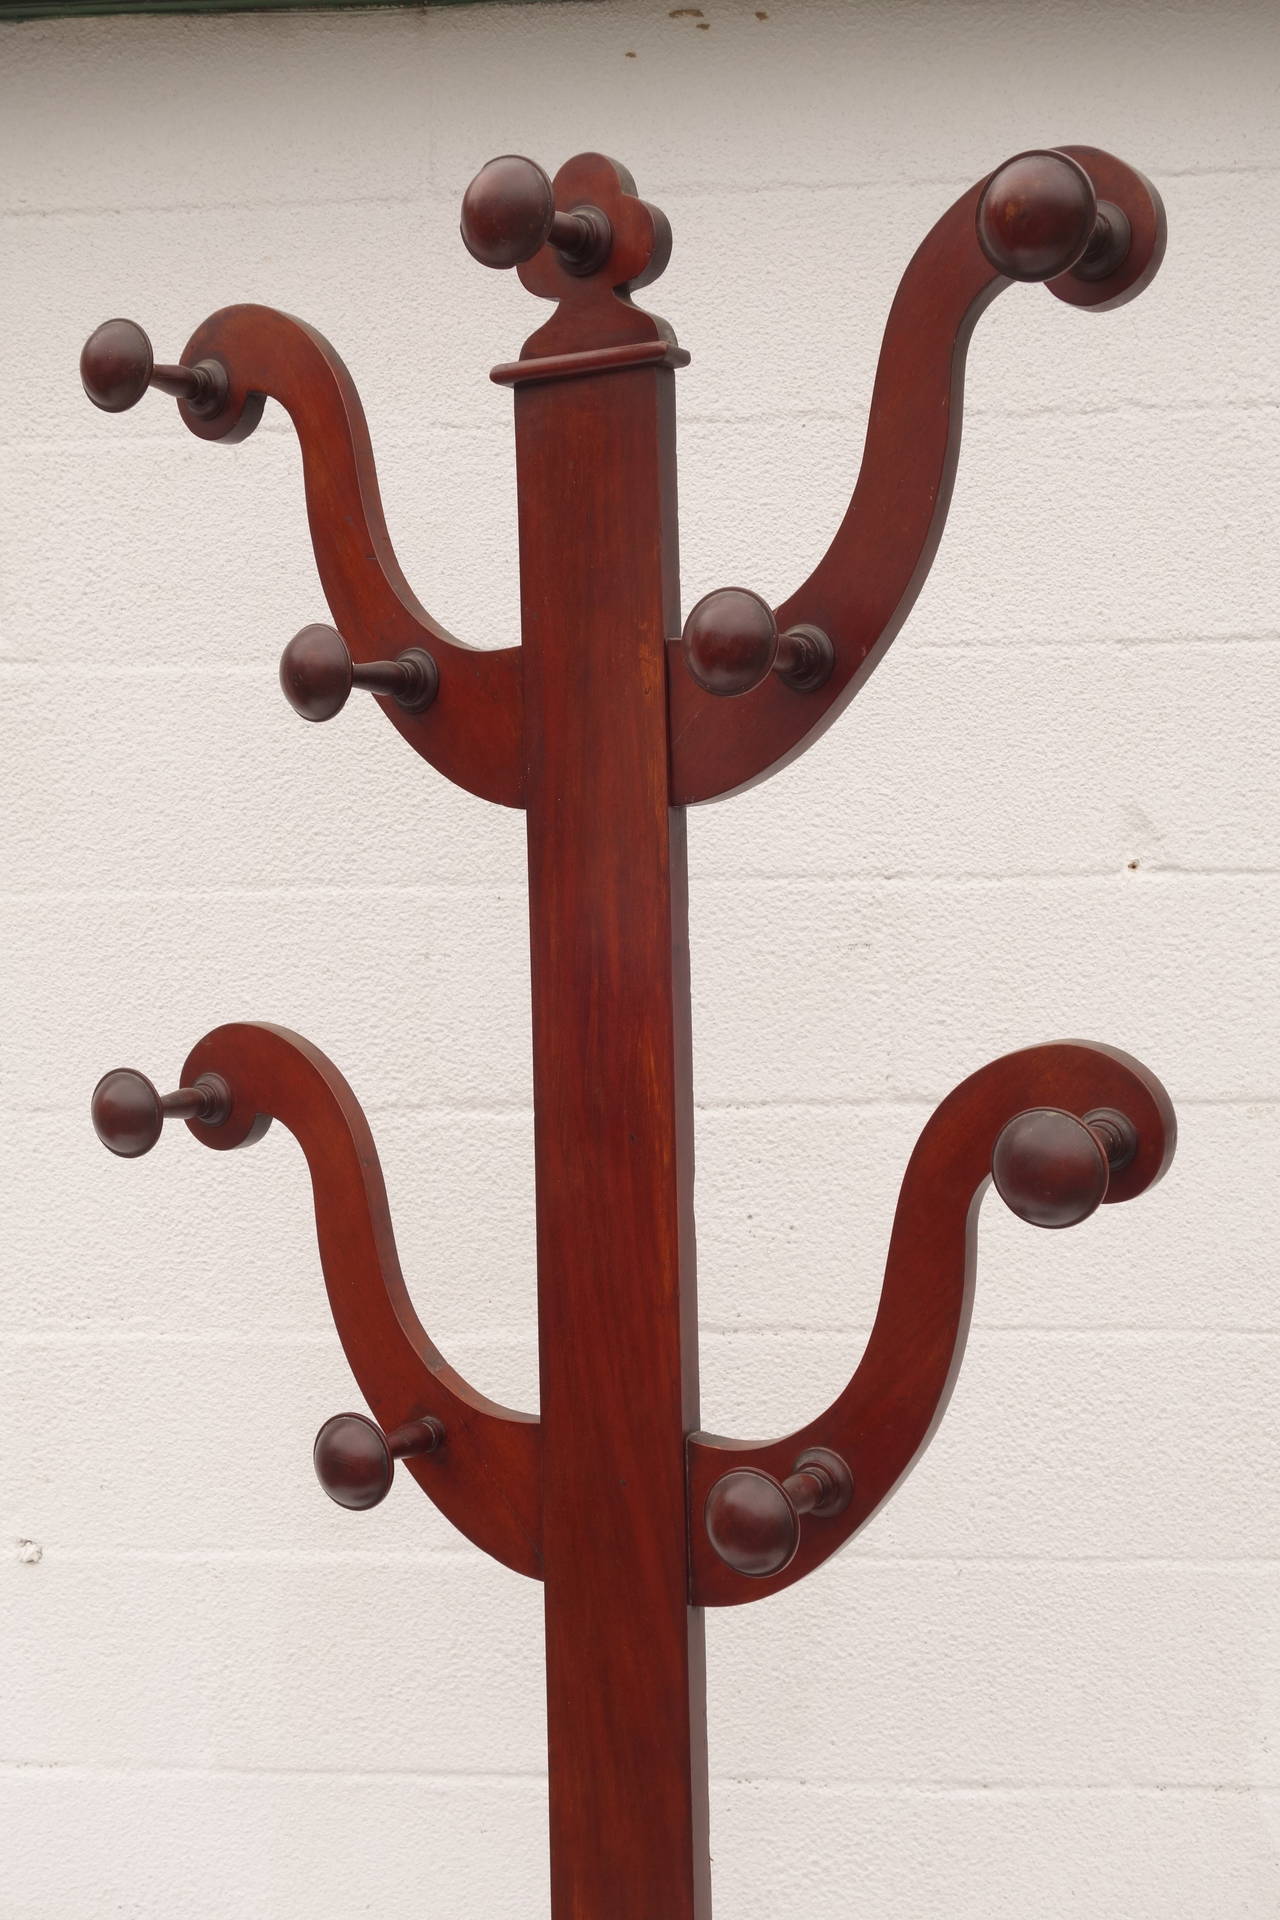 English Mahogany coat rack. Please contact for more information.